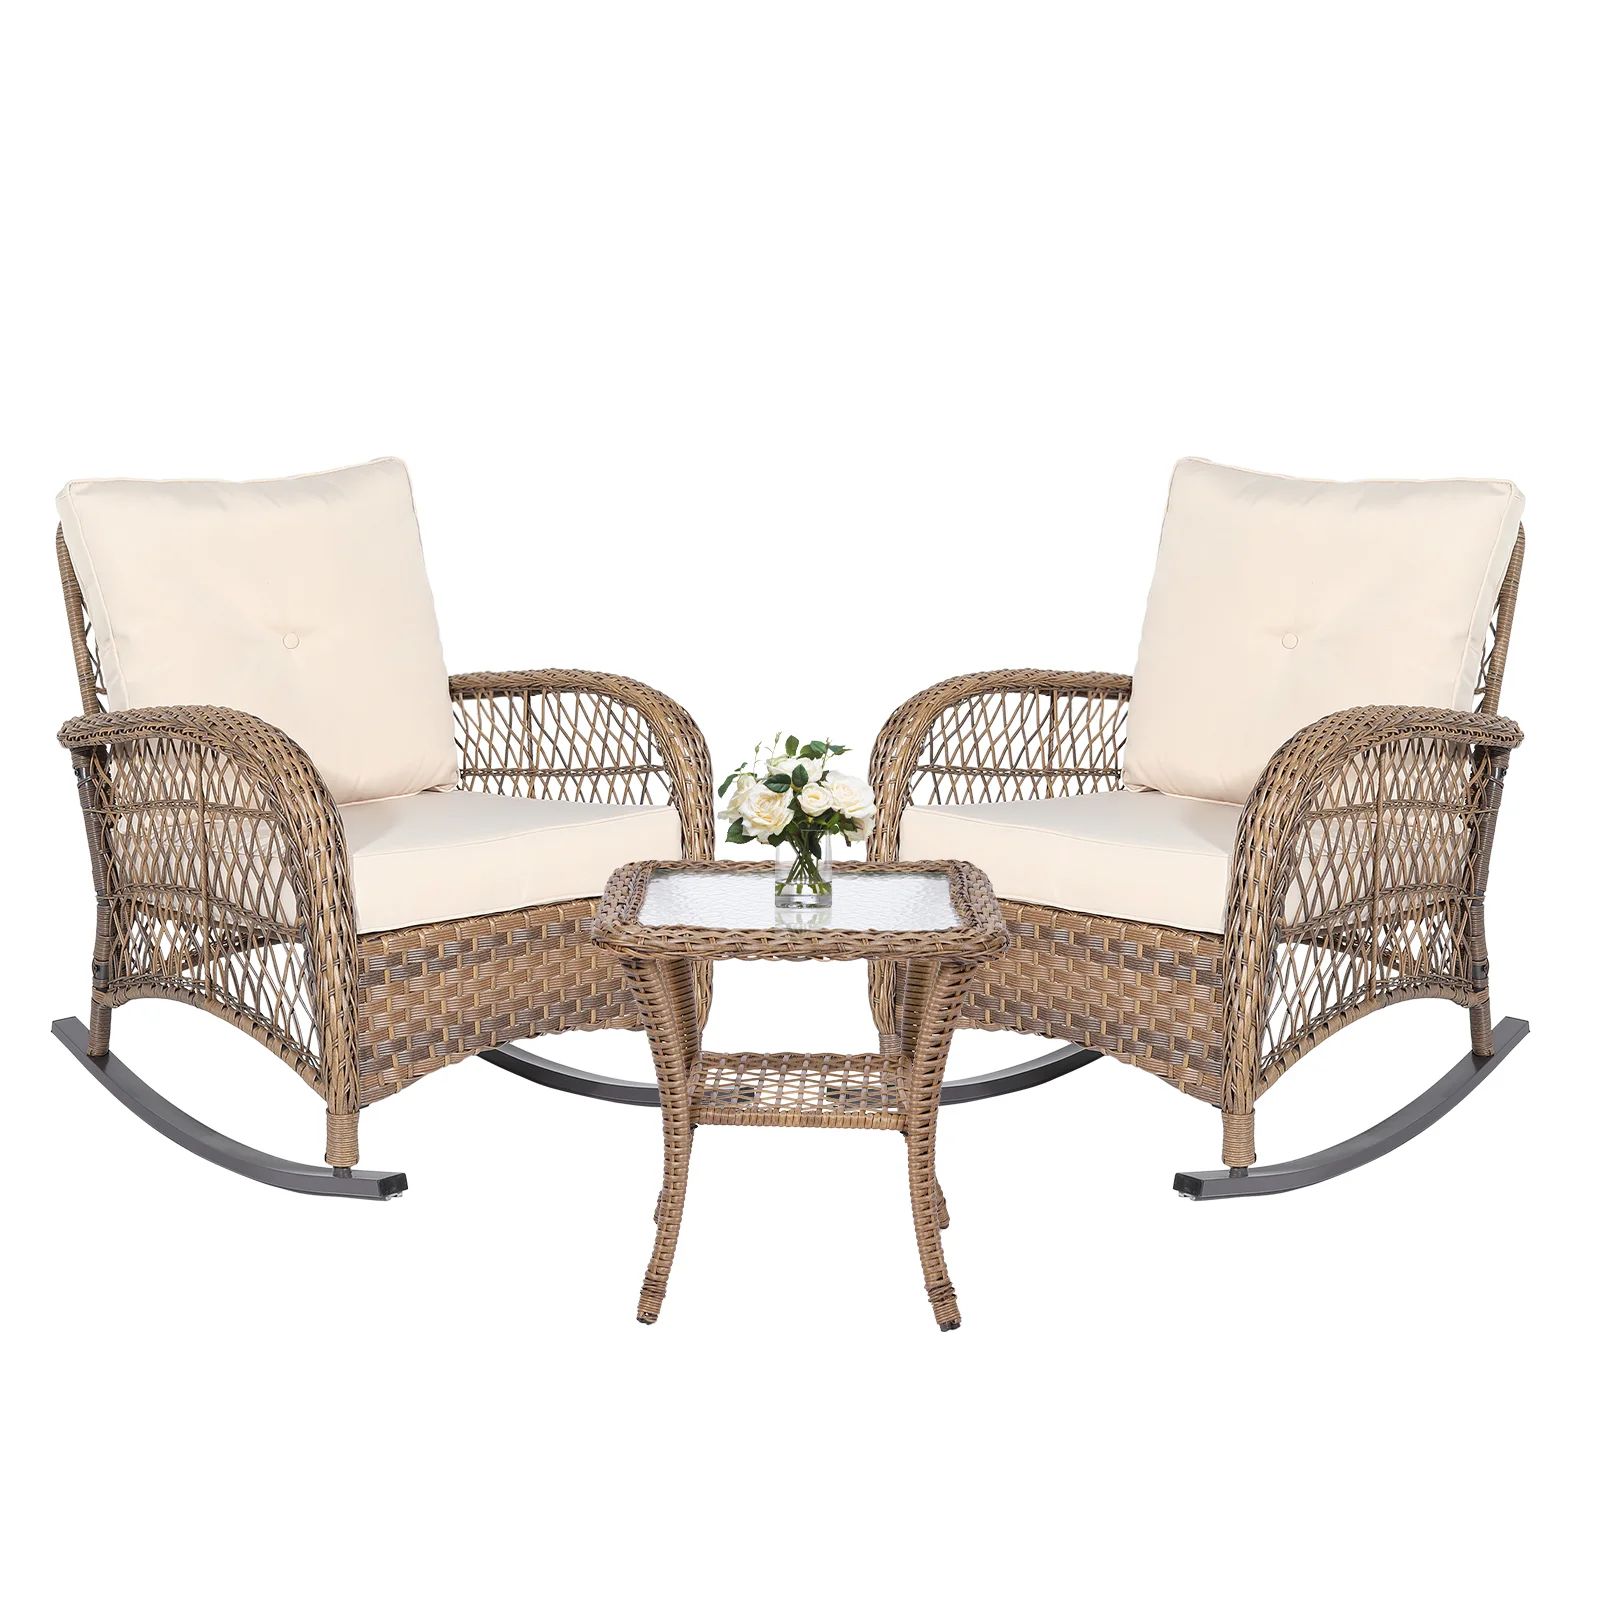 Vredenburgh Wicker/Rattan 2 - Person Seating Group with Cushions | Wayfair North America